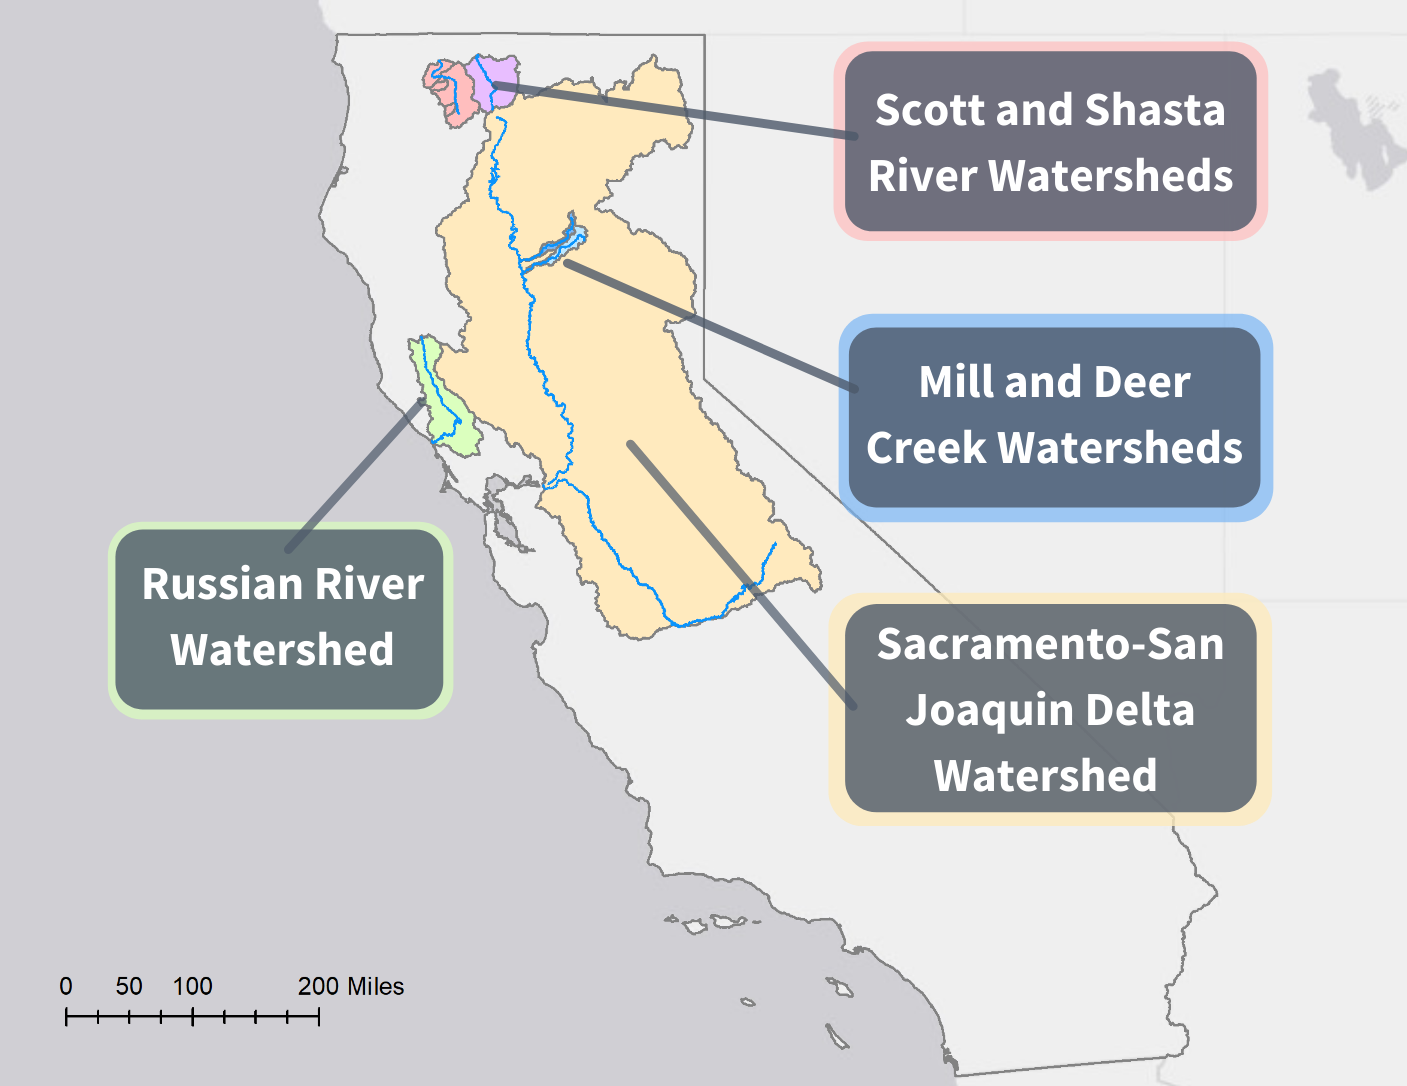 California Watershed map highlighting the six drought impacted watersheds